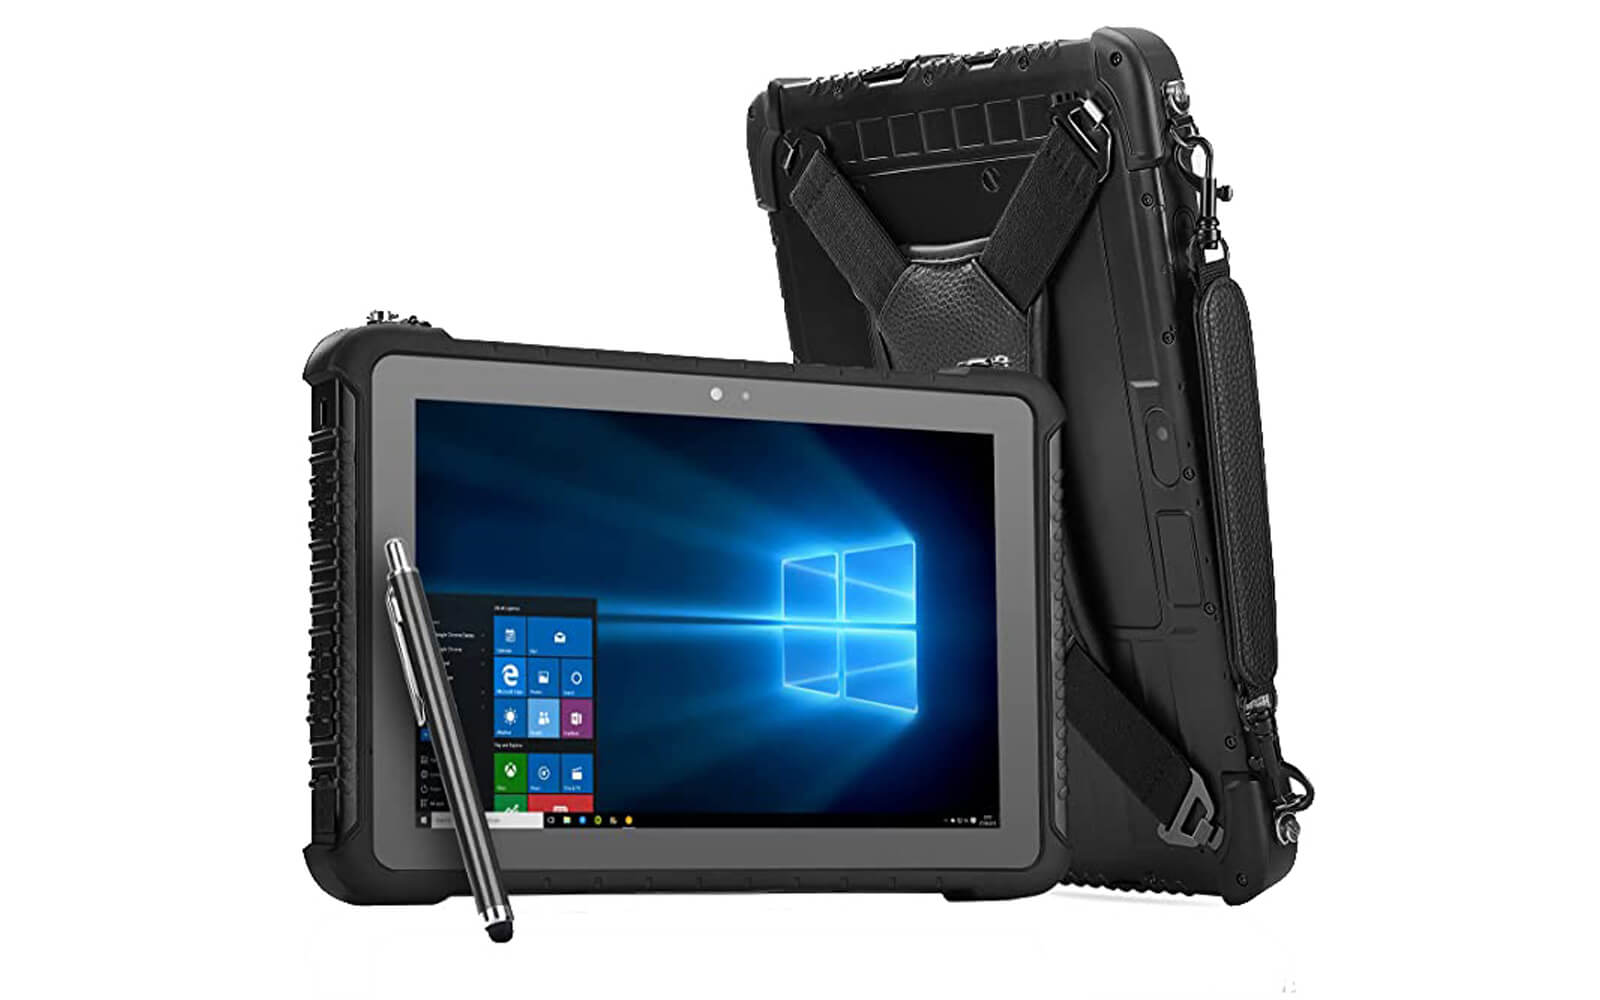 MUNBYN IRT05 Android Rugged Tablet PC